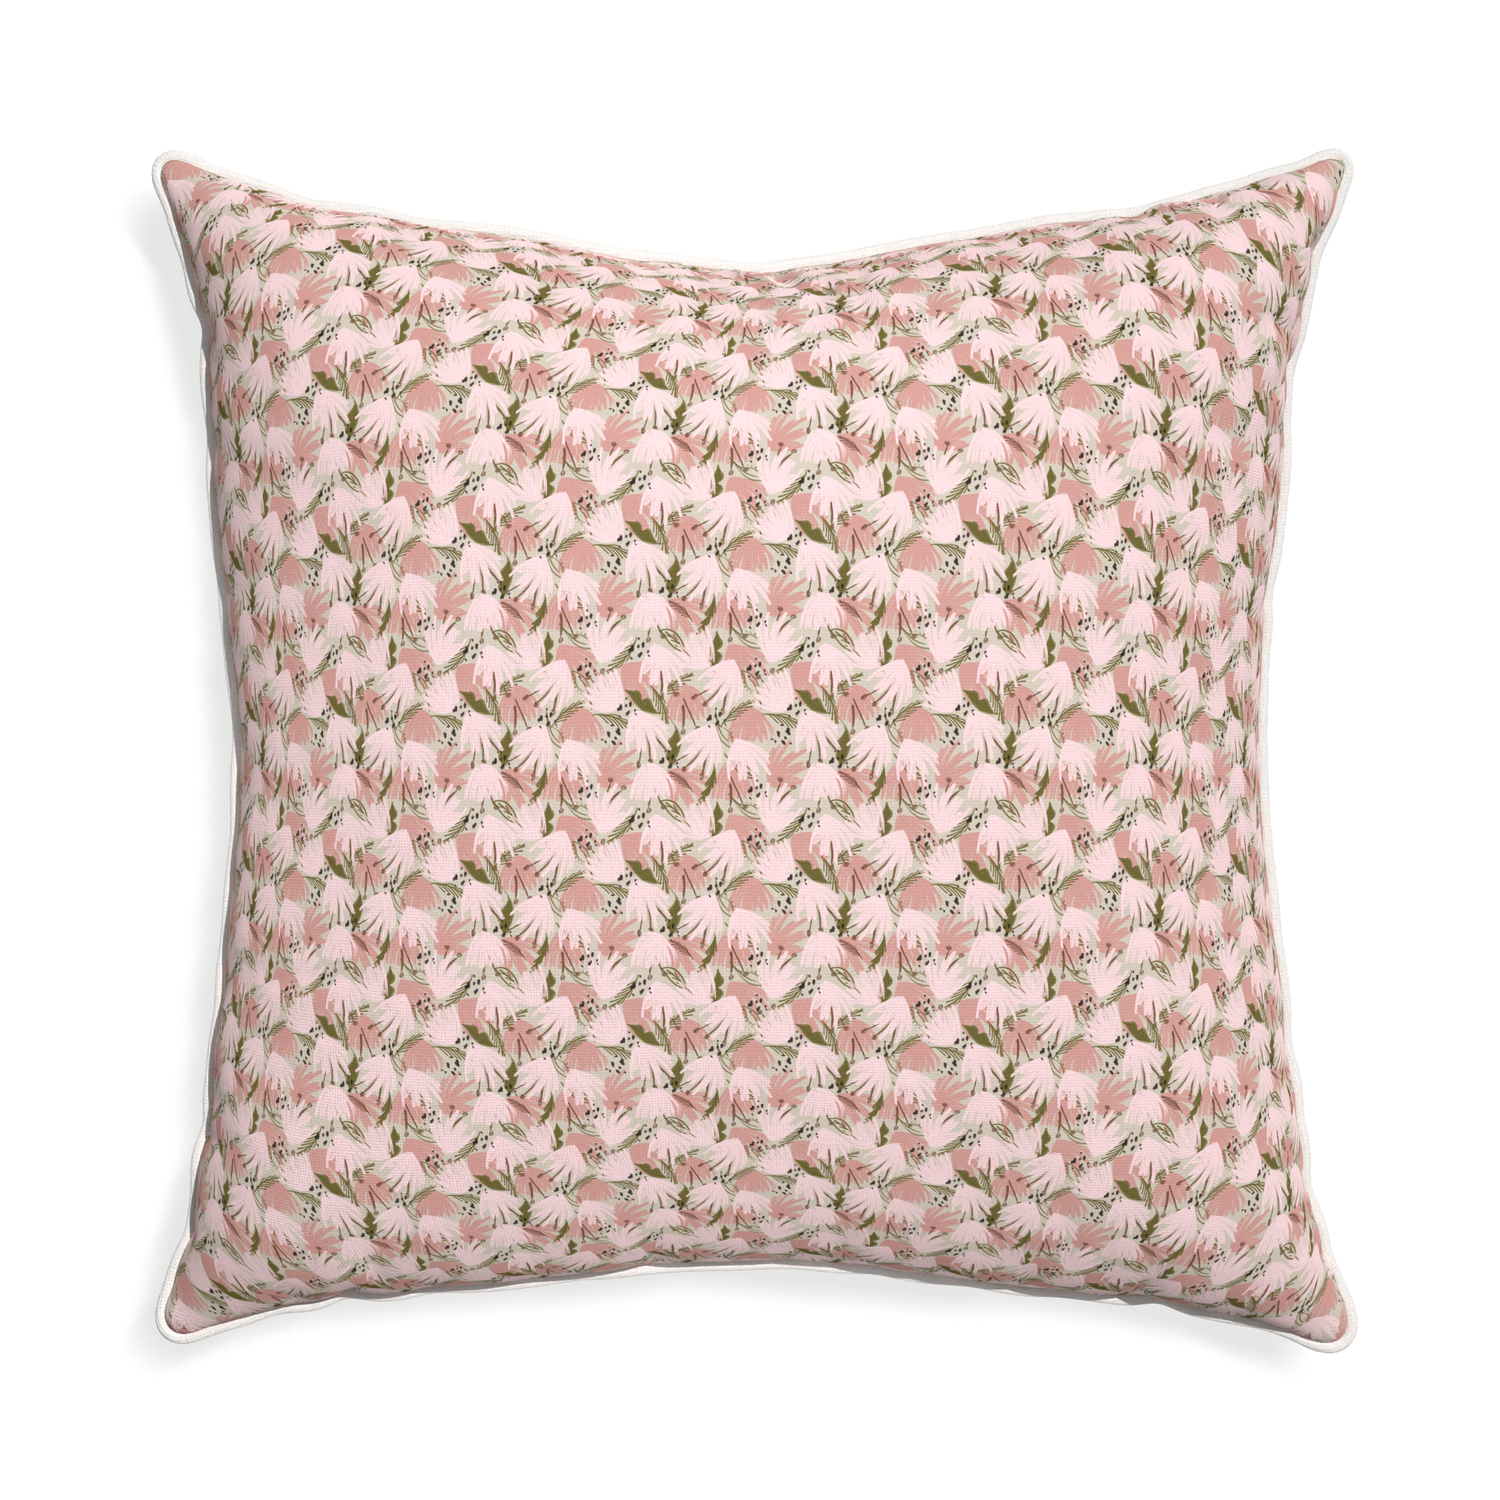 Euro-sham eden pink custom pillow with snow piping on white background